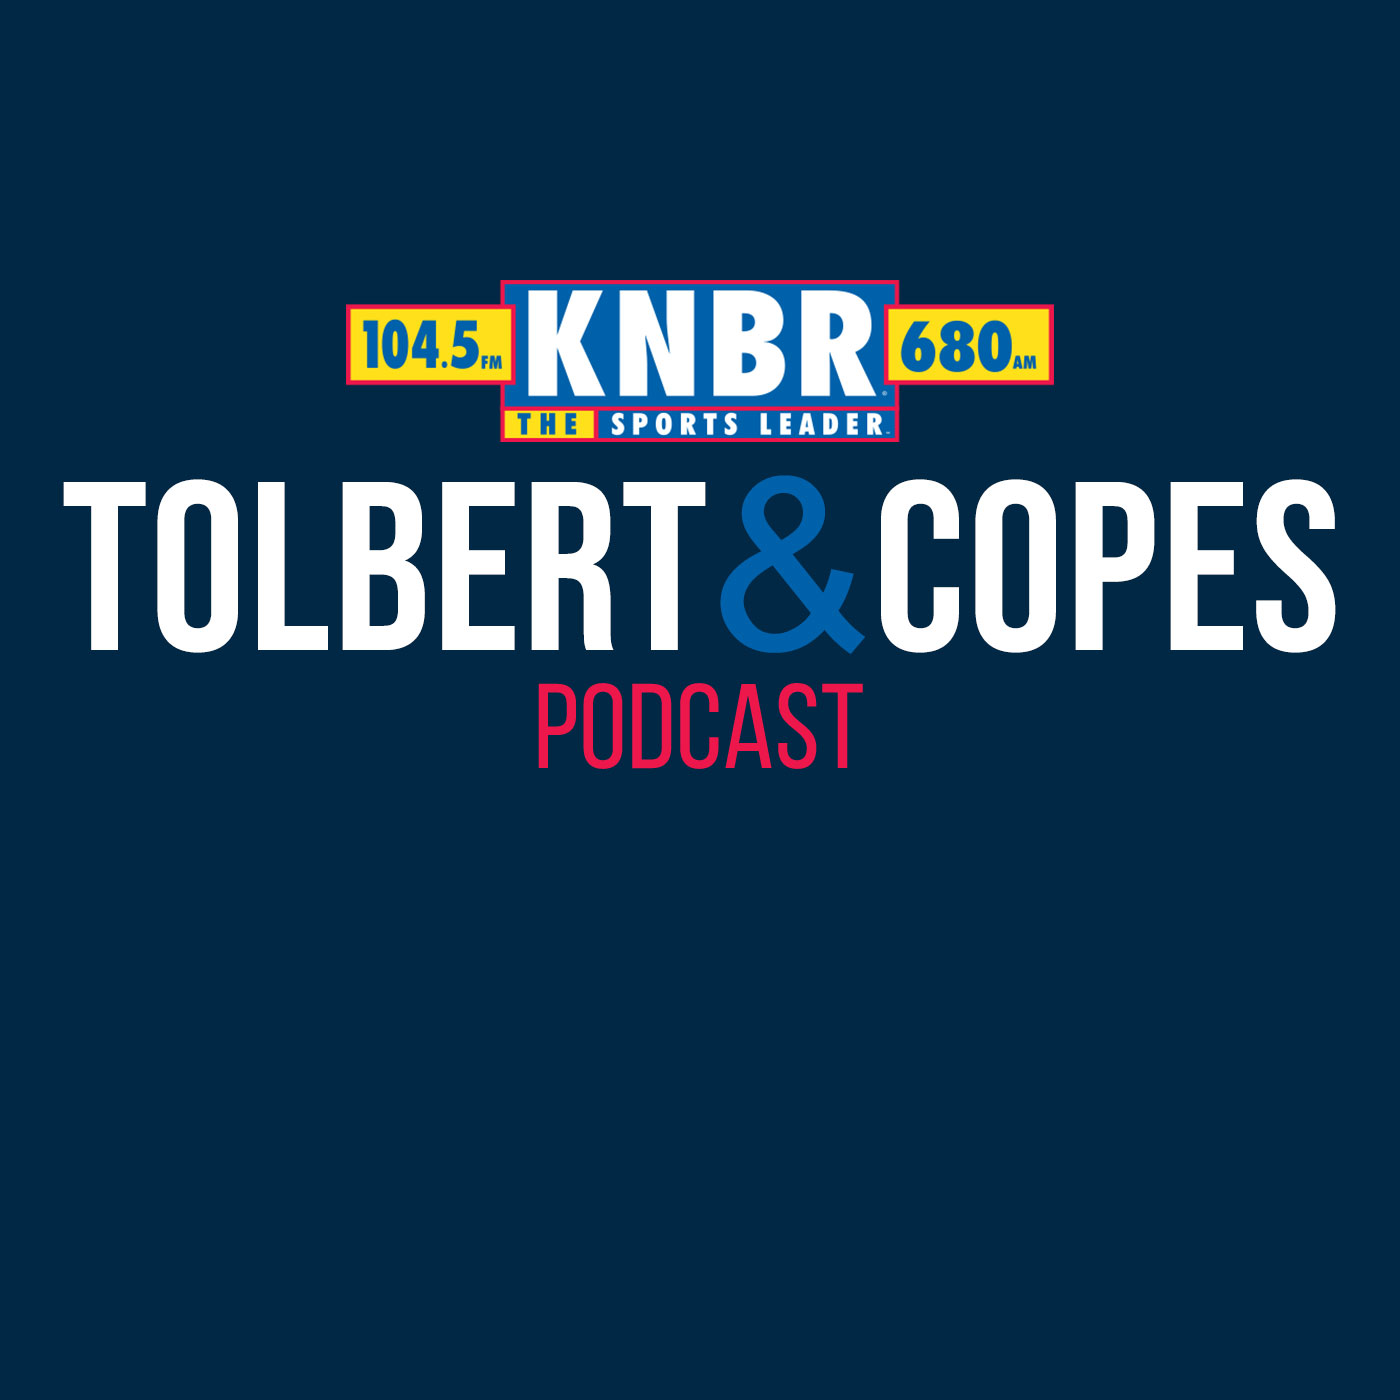 6-25 Dalton Johnson joins Tolbert & Copes to discuss if Klay Thompson's days as a Warrior are over